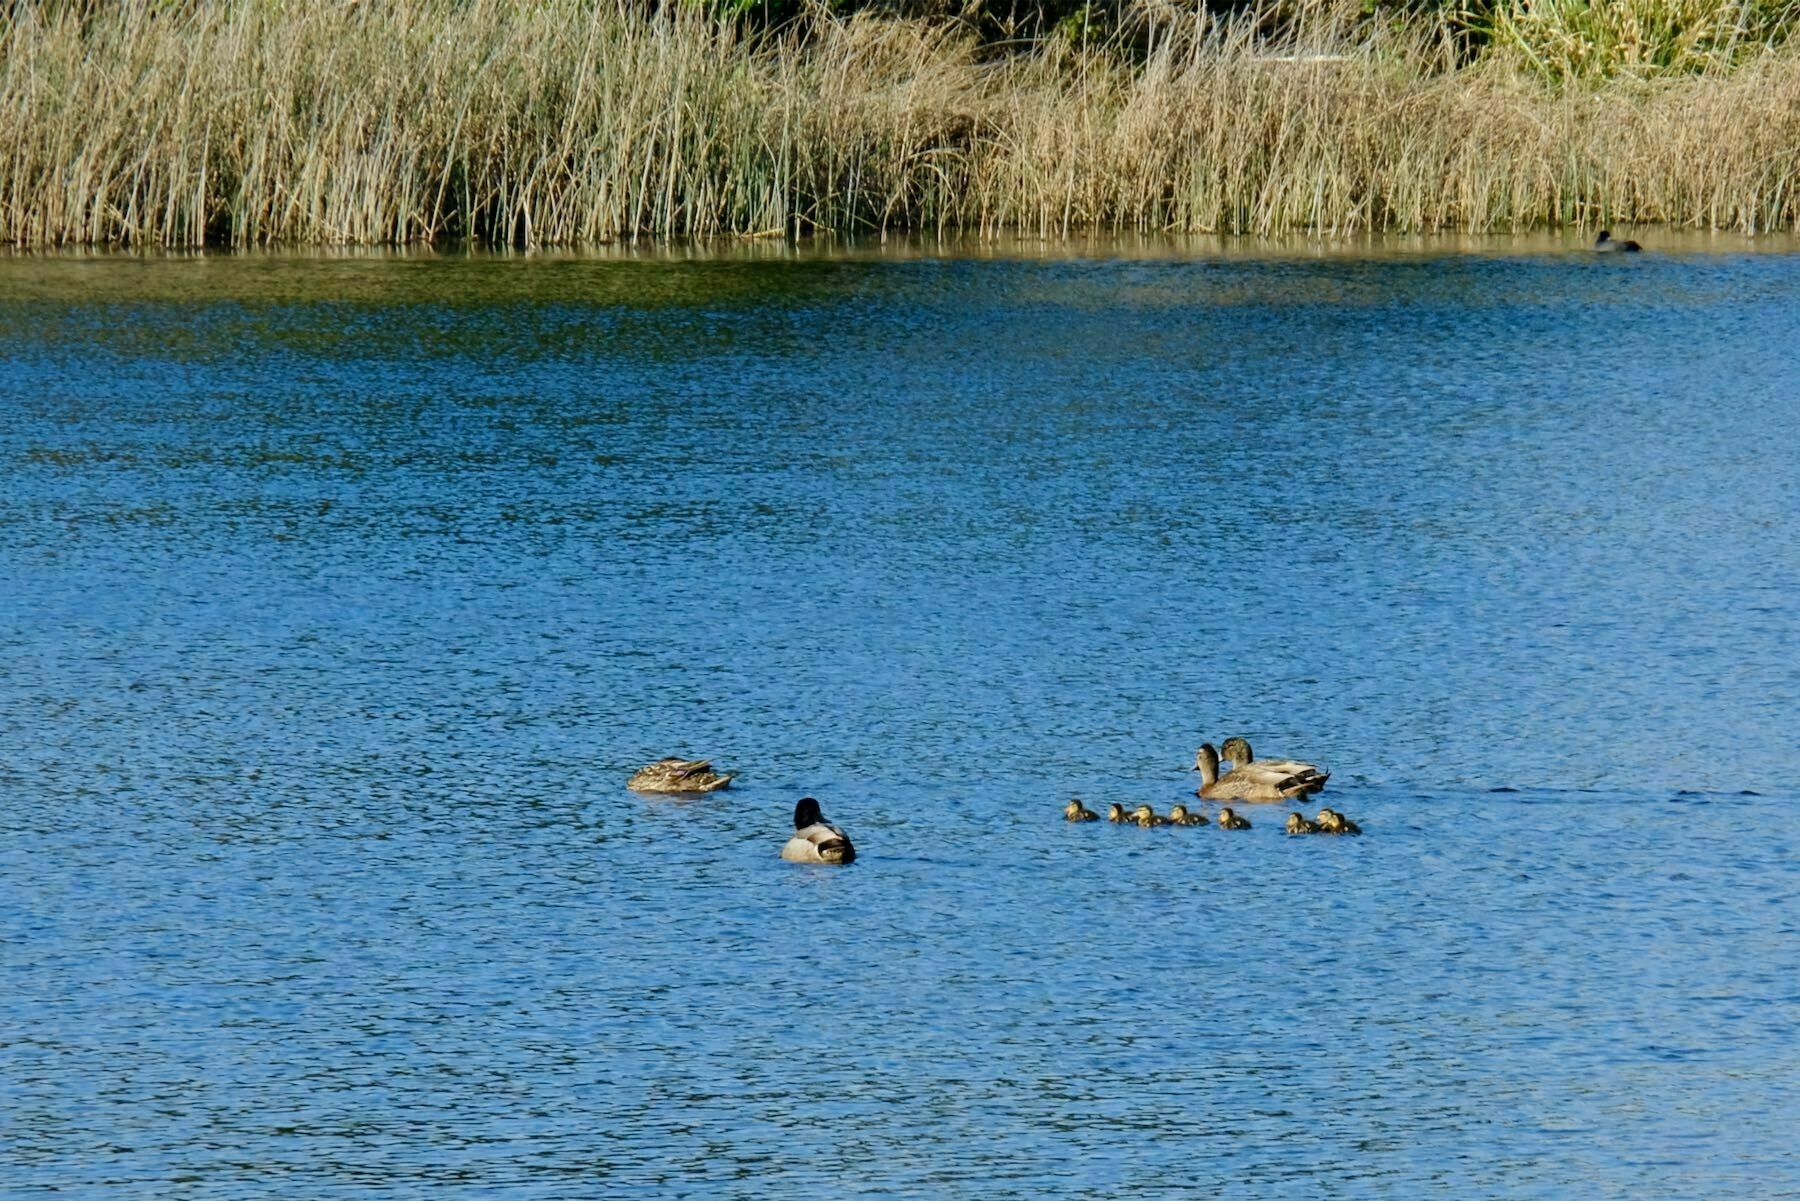 4 ducks and 7 tiny ducklings on a lake. 